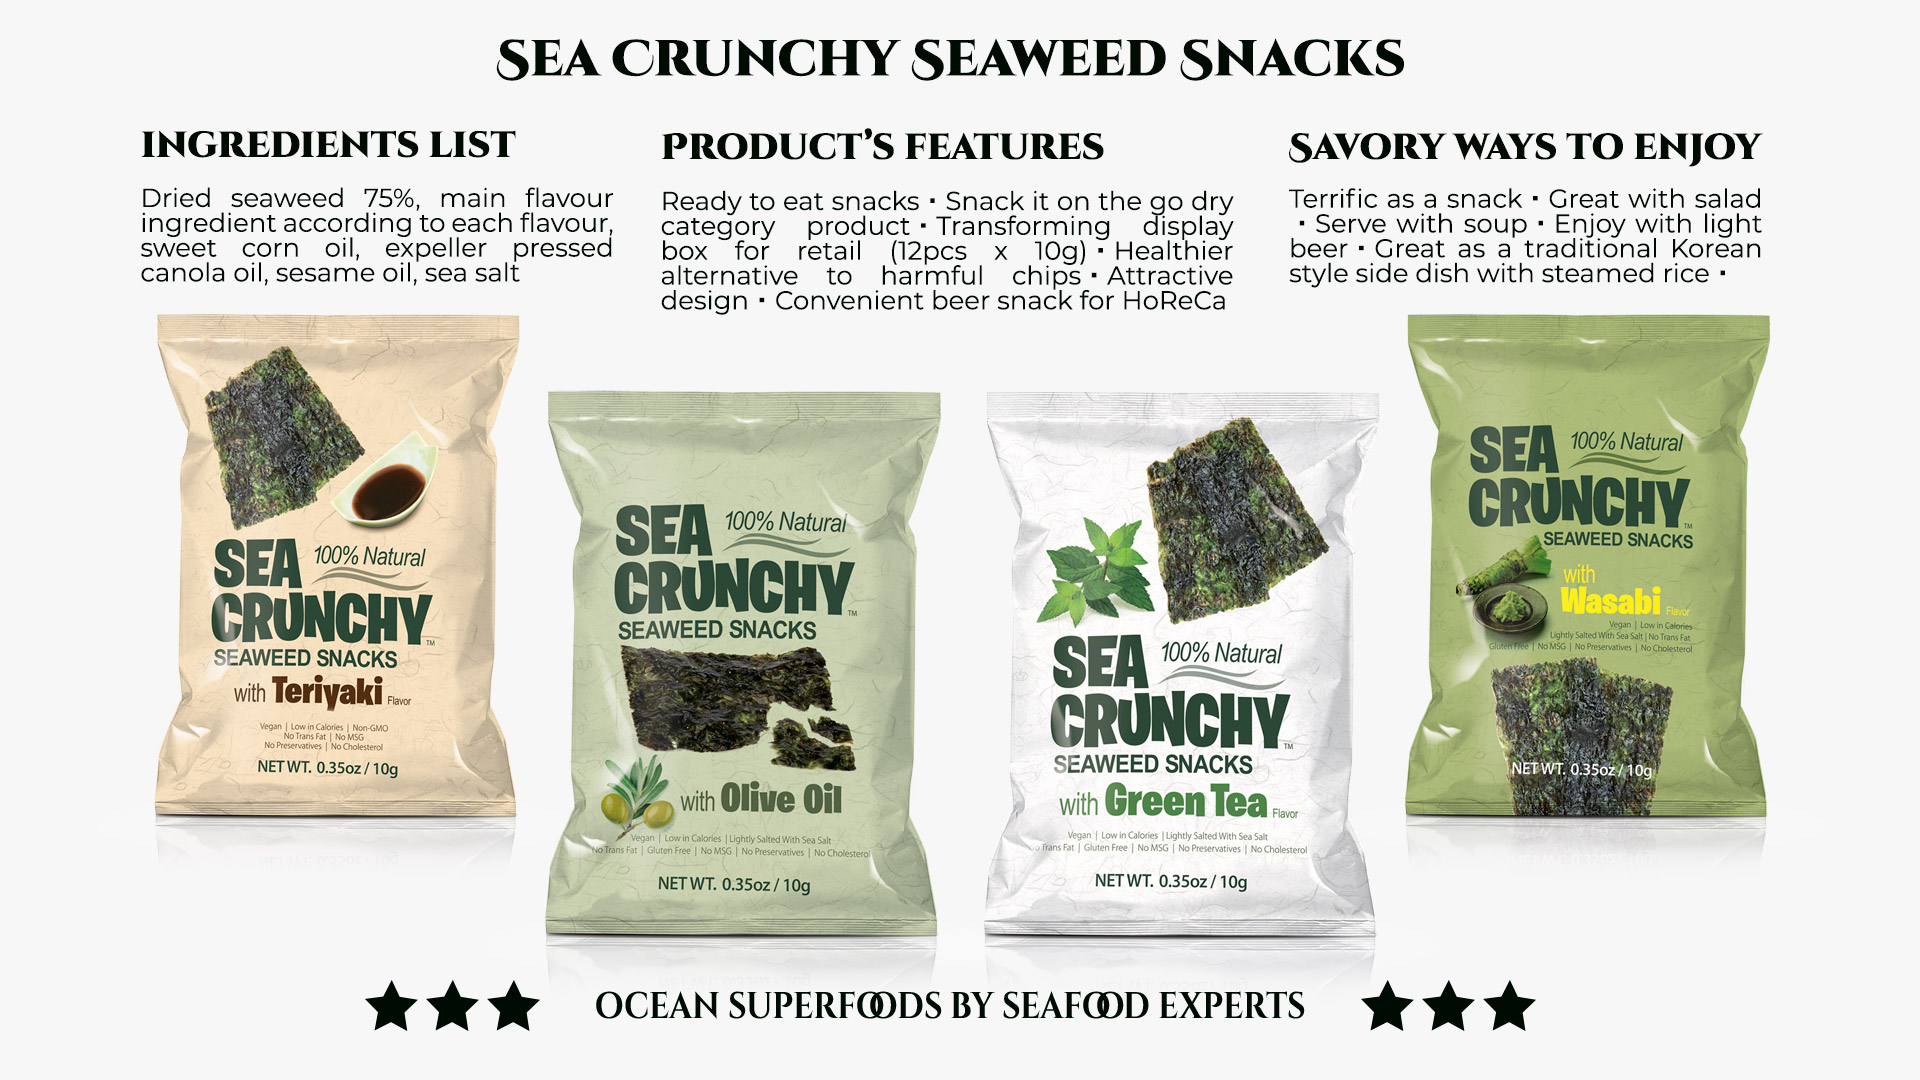 SEA CRUNCHY Seaweed Snacks are presented by Seaweed Market Company